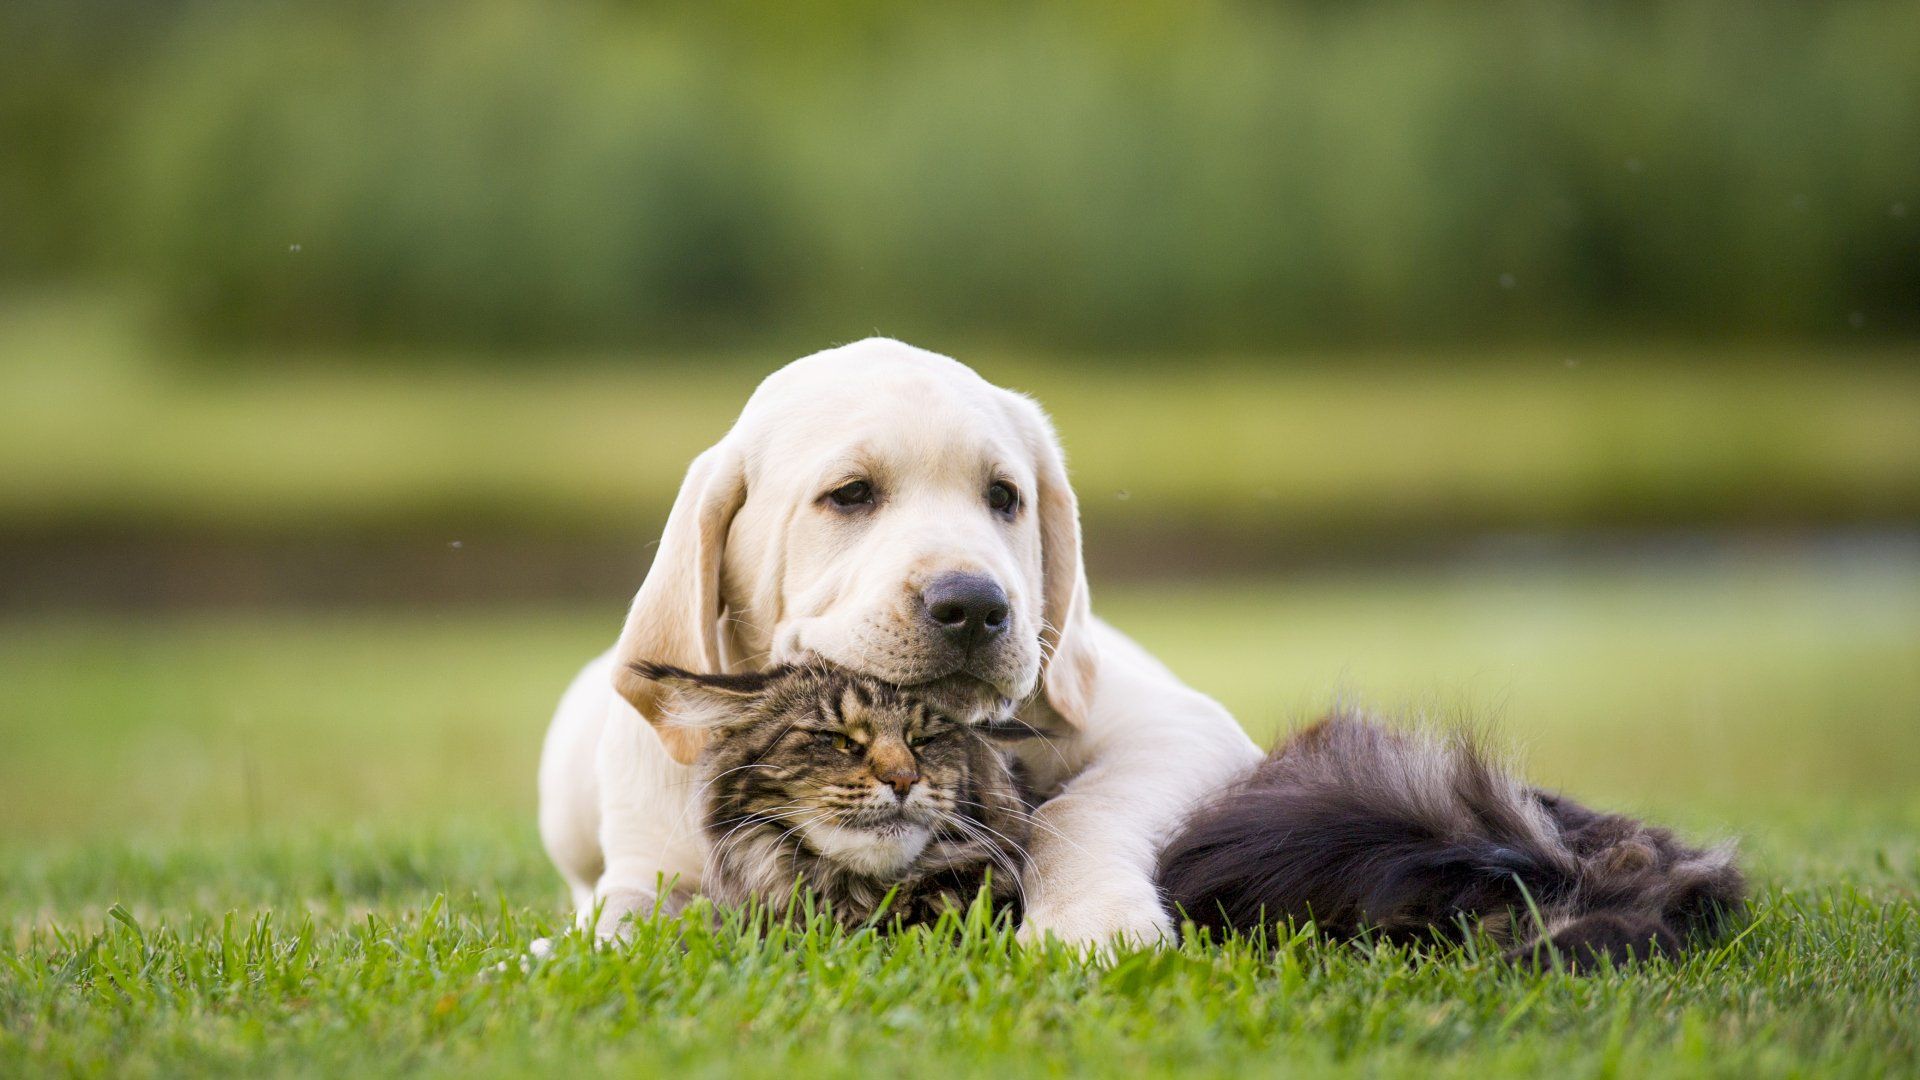 Pet Shots — Dog And Cat Lying On The Grass In Lewisville, TX